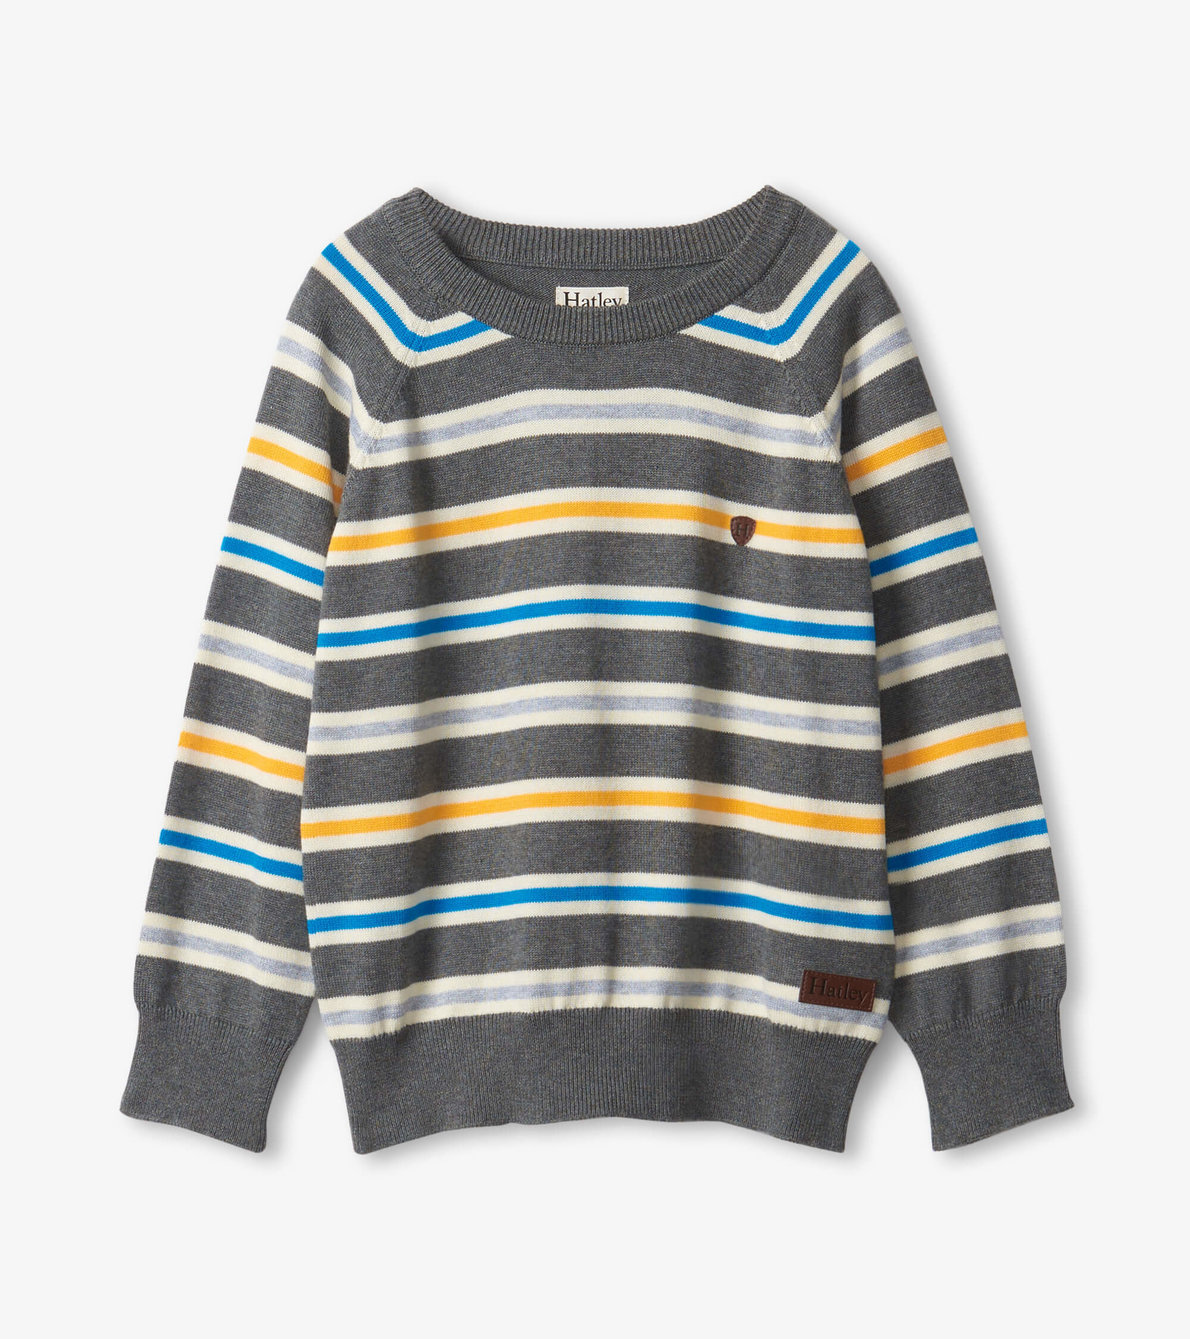 View larger image of Boys Dino Stripes Crew Neck Sweater